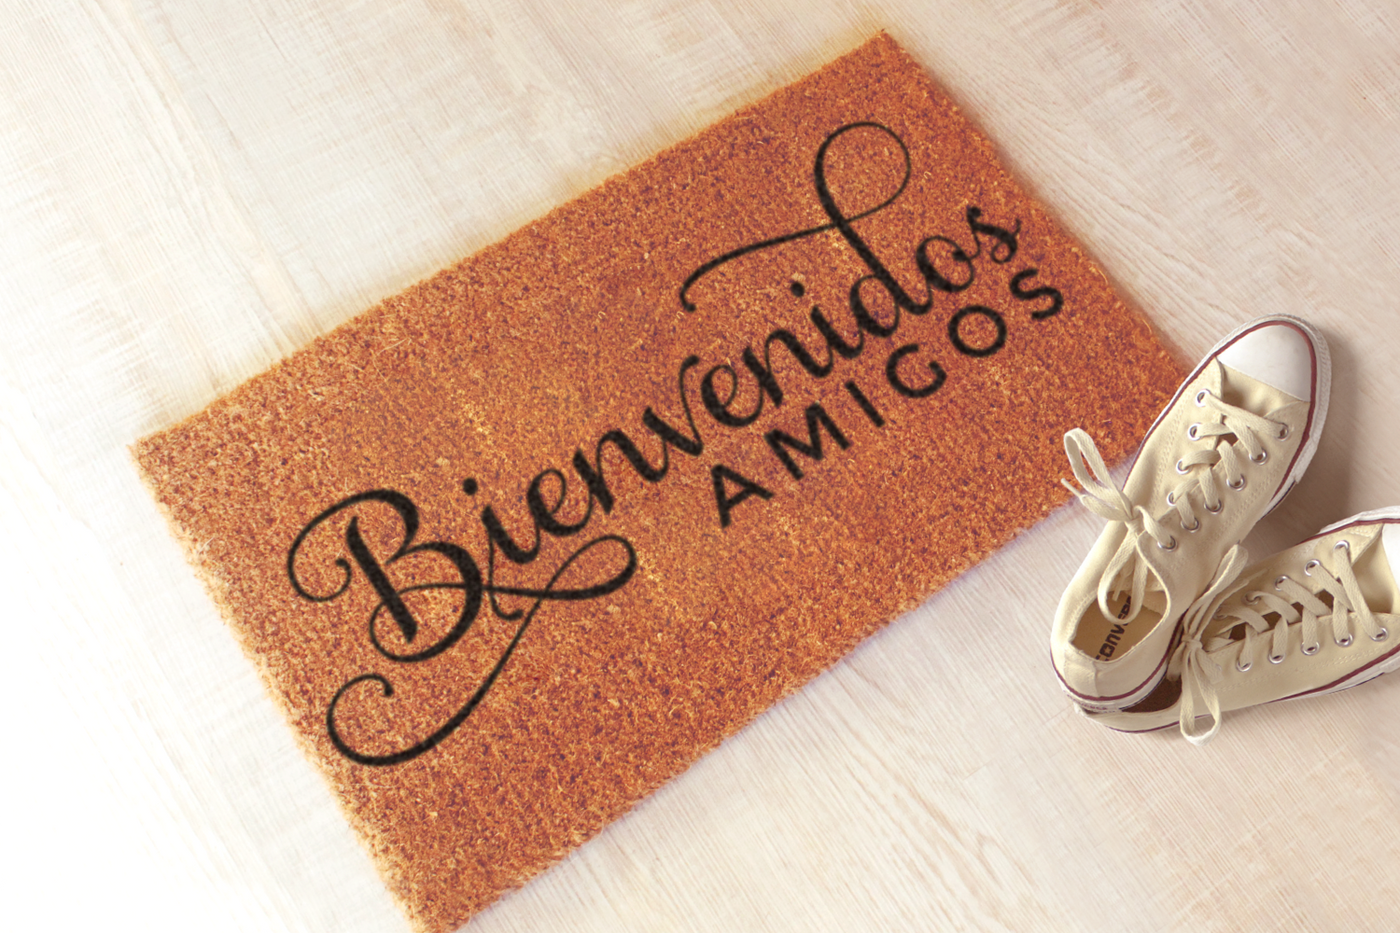 A doormat with a pair of ivory converse laying nearby. The doormat says "Bienvenidos amigos."